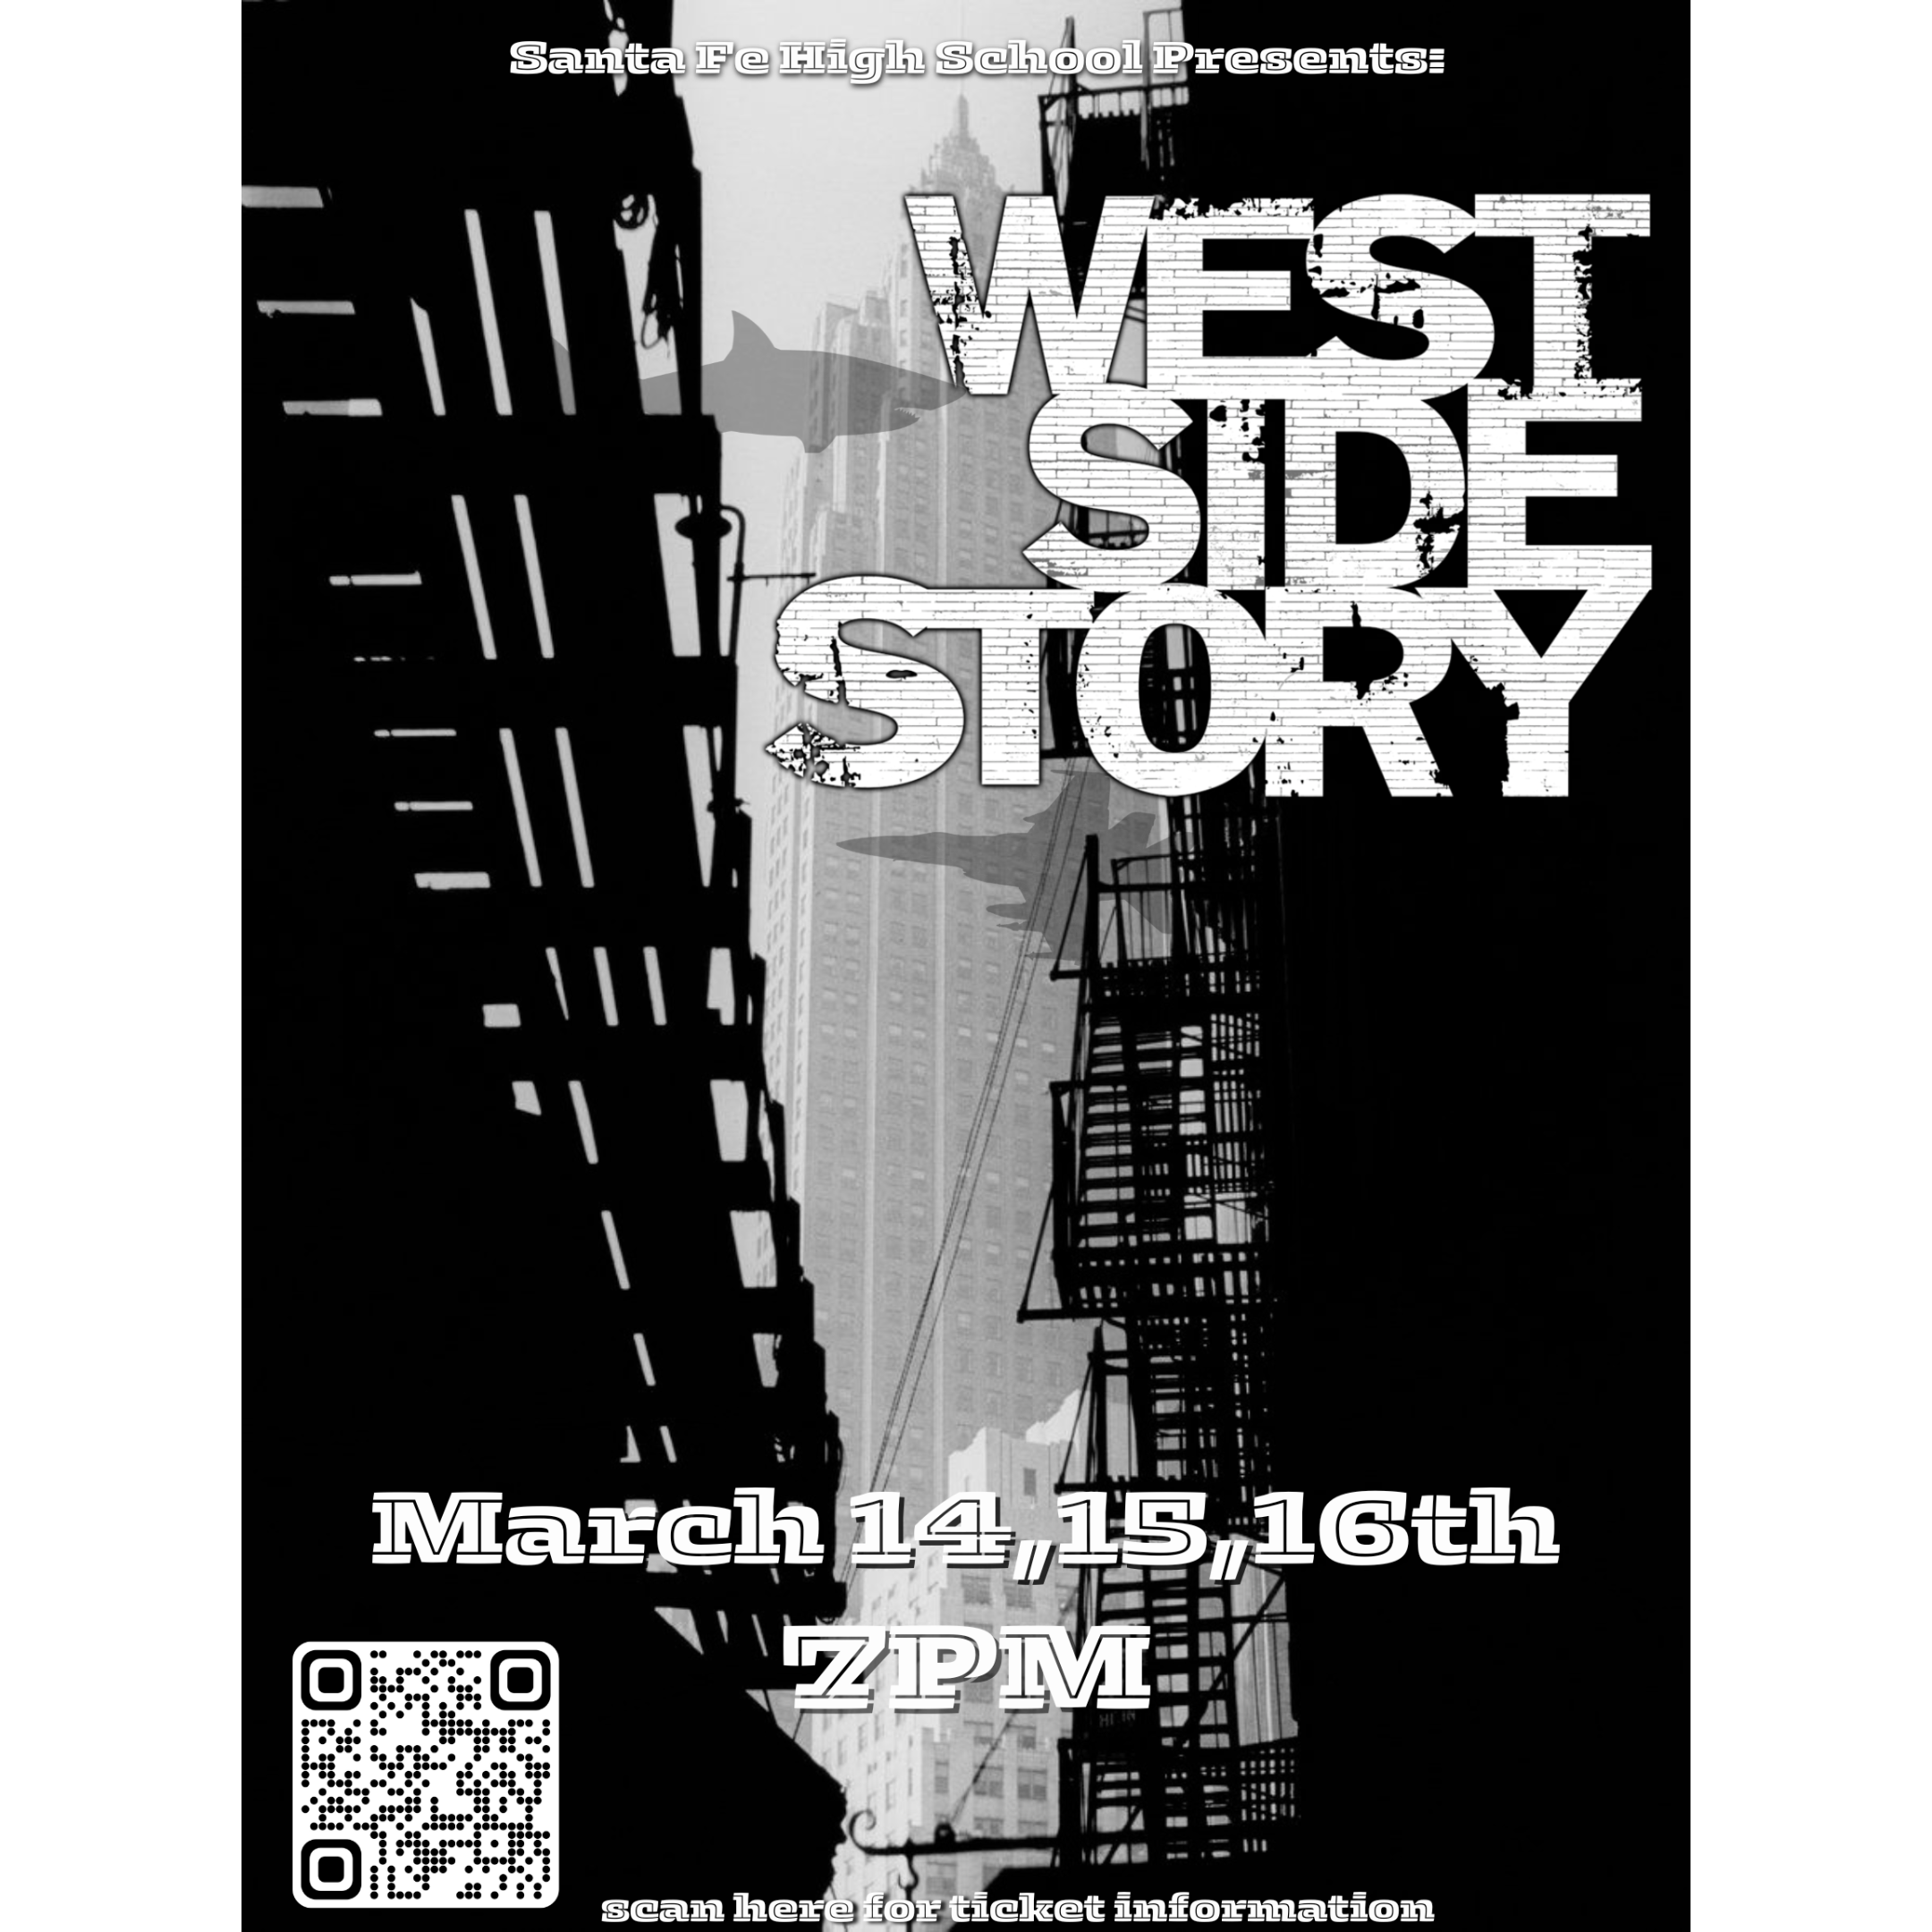 west side story march 14, 15, 16 7pm